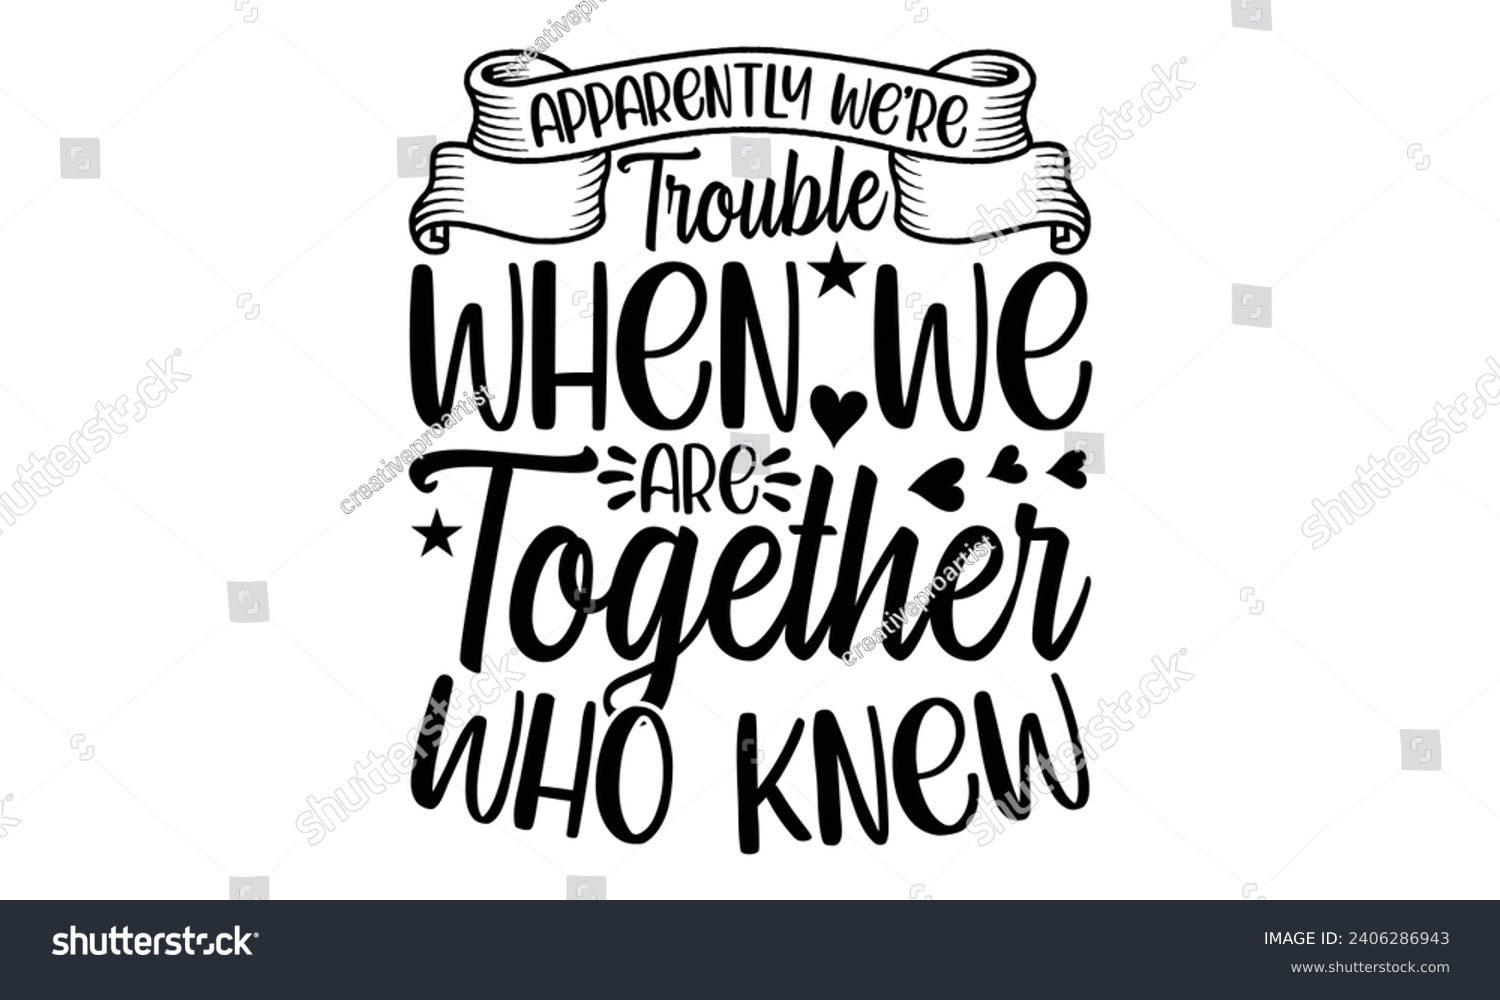 SVG of Apparently We're Trouble When We Are Together Who Knew- Best friends t- shirt design, Hand drawn vintage illustration with hand-lettering and decoration elements, greeting card template with typograph svg